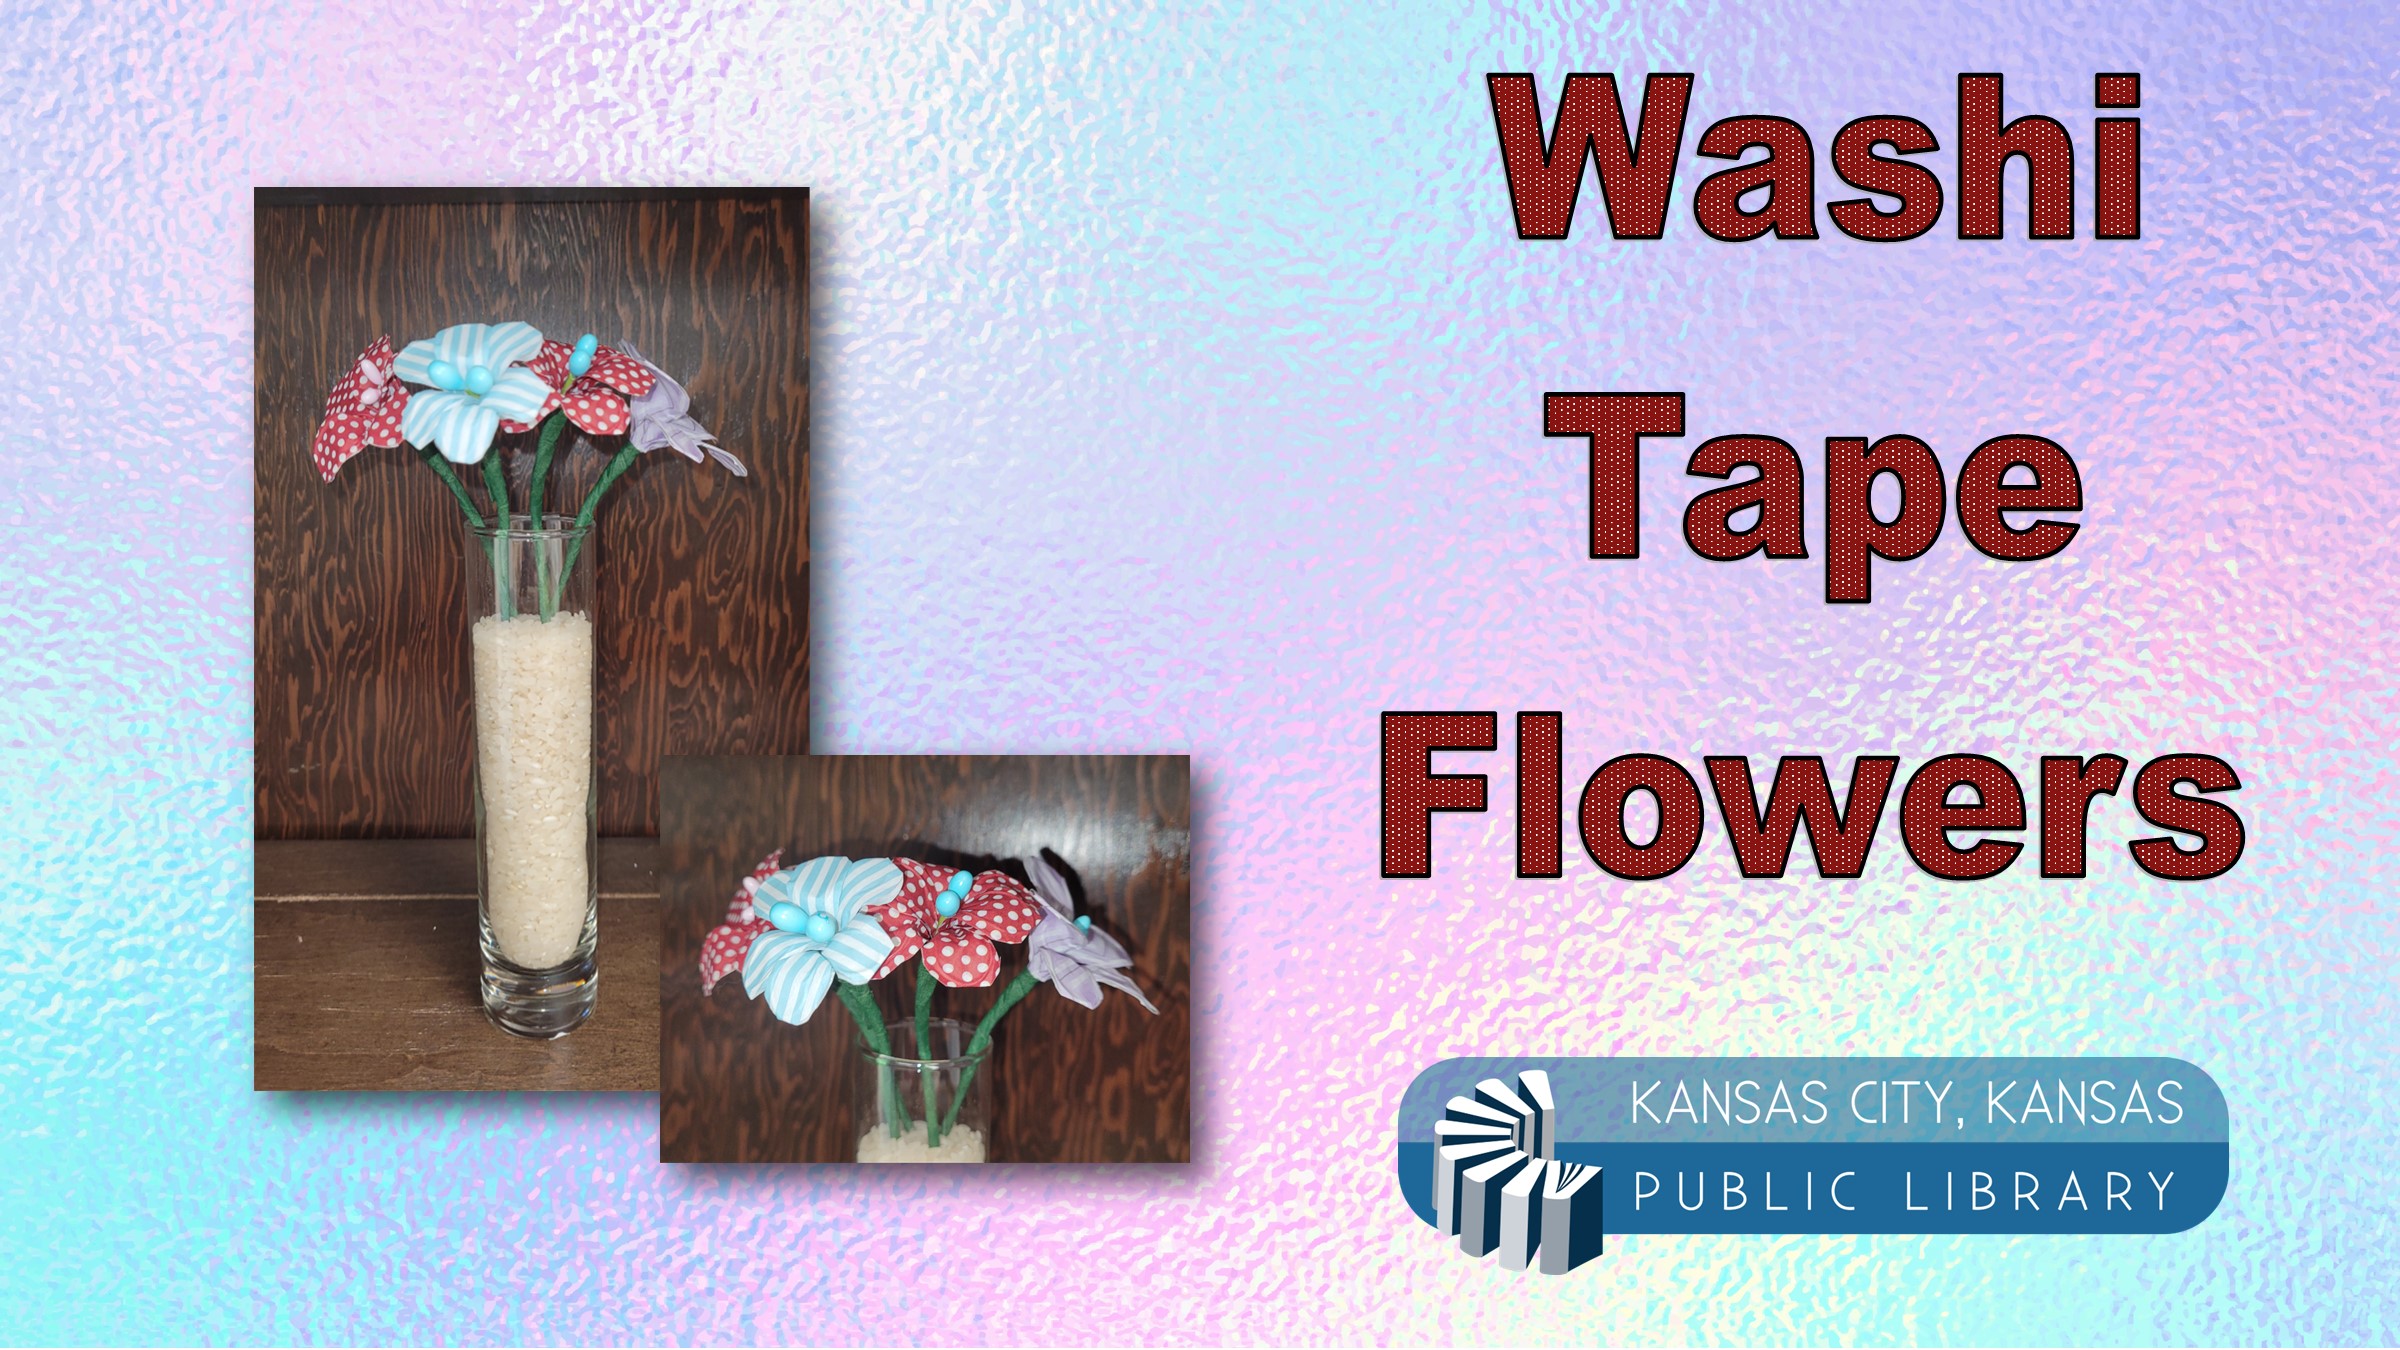 Picture of flowers made from washi tape & the library logo on a pastel background